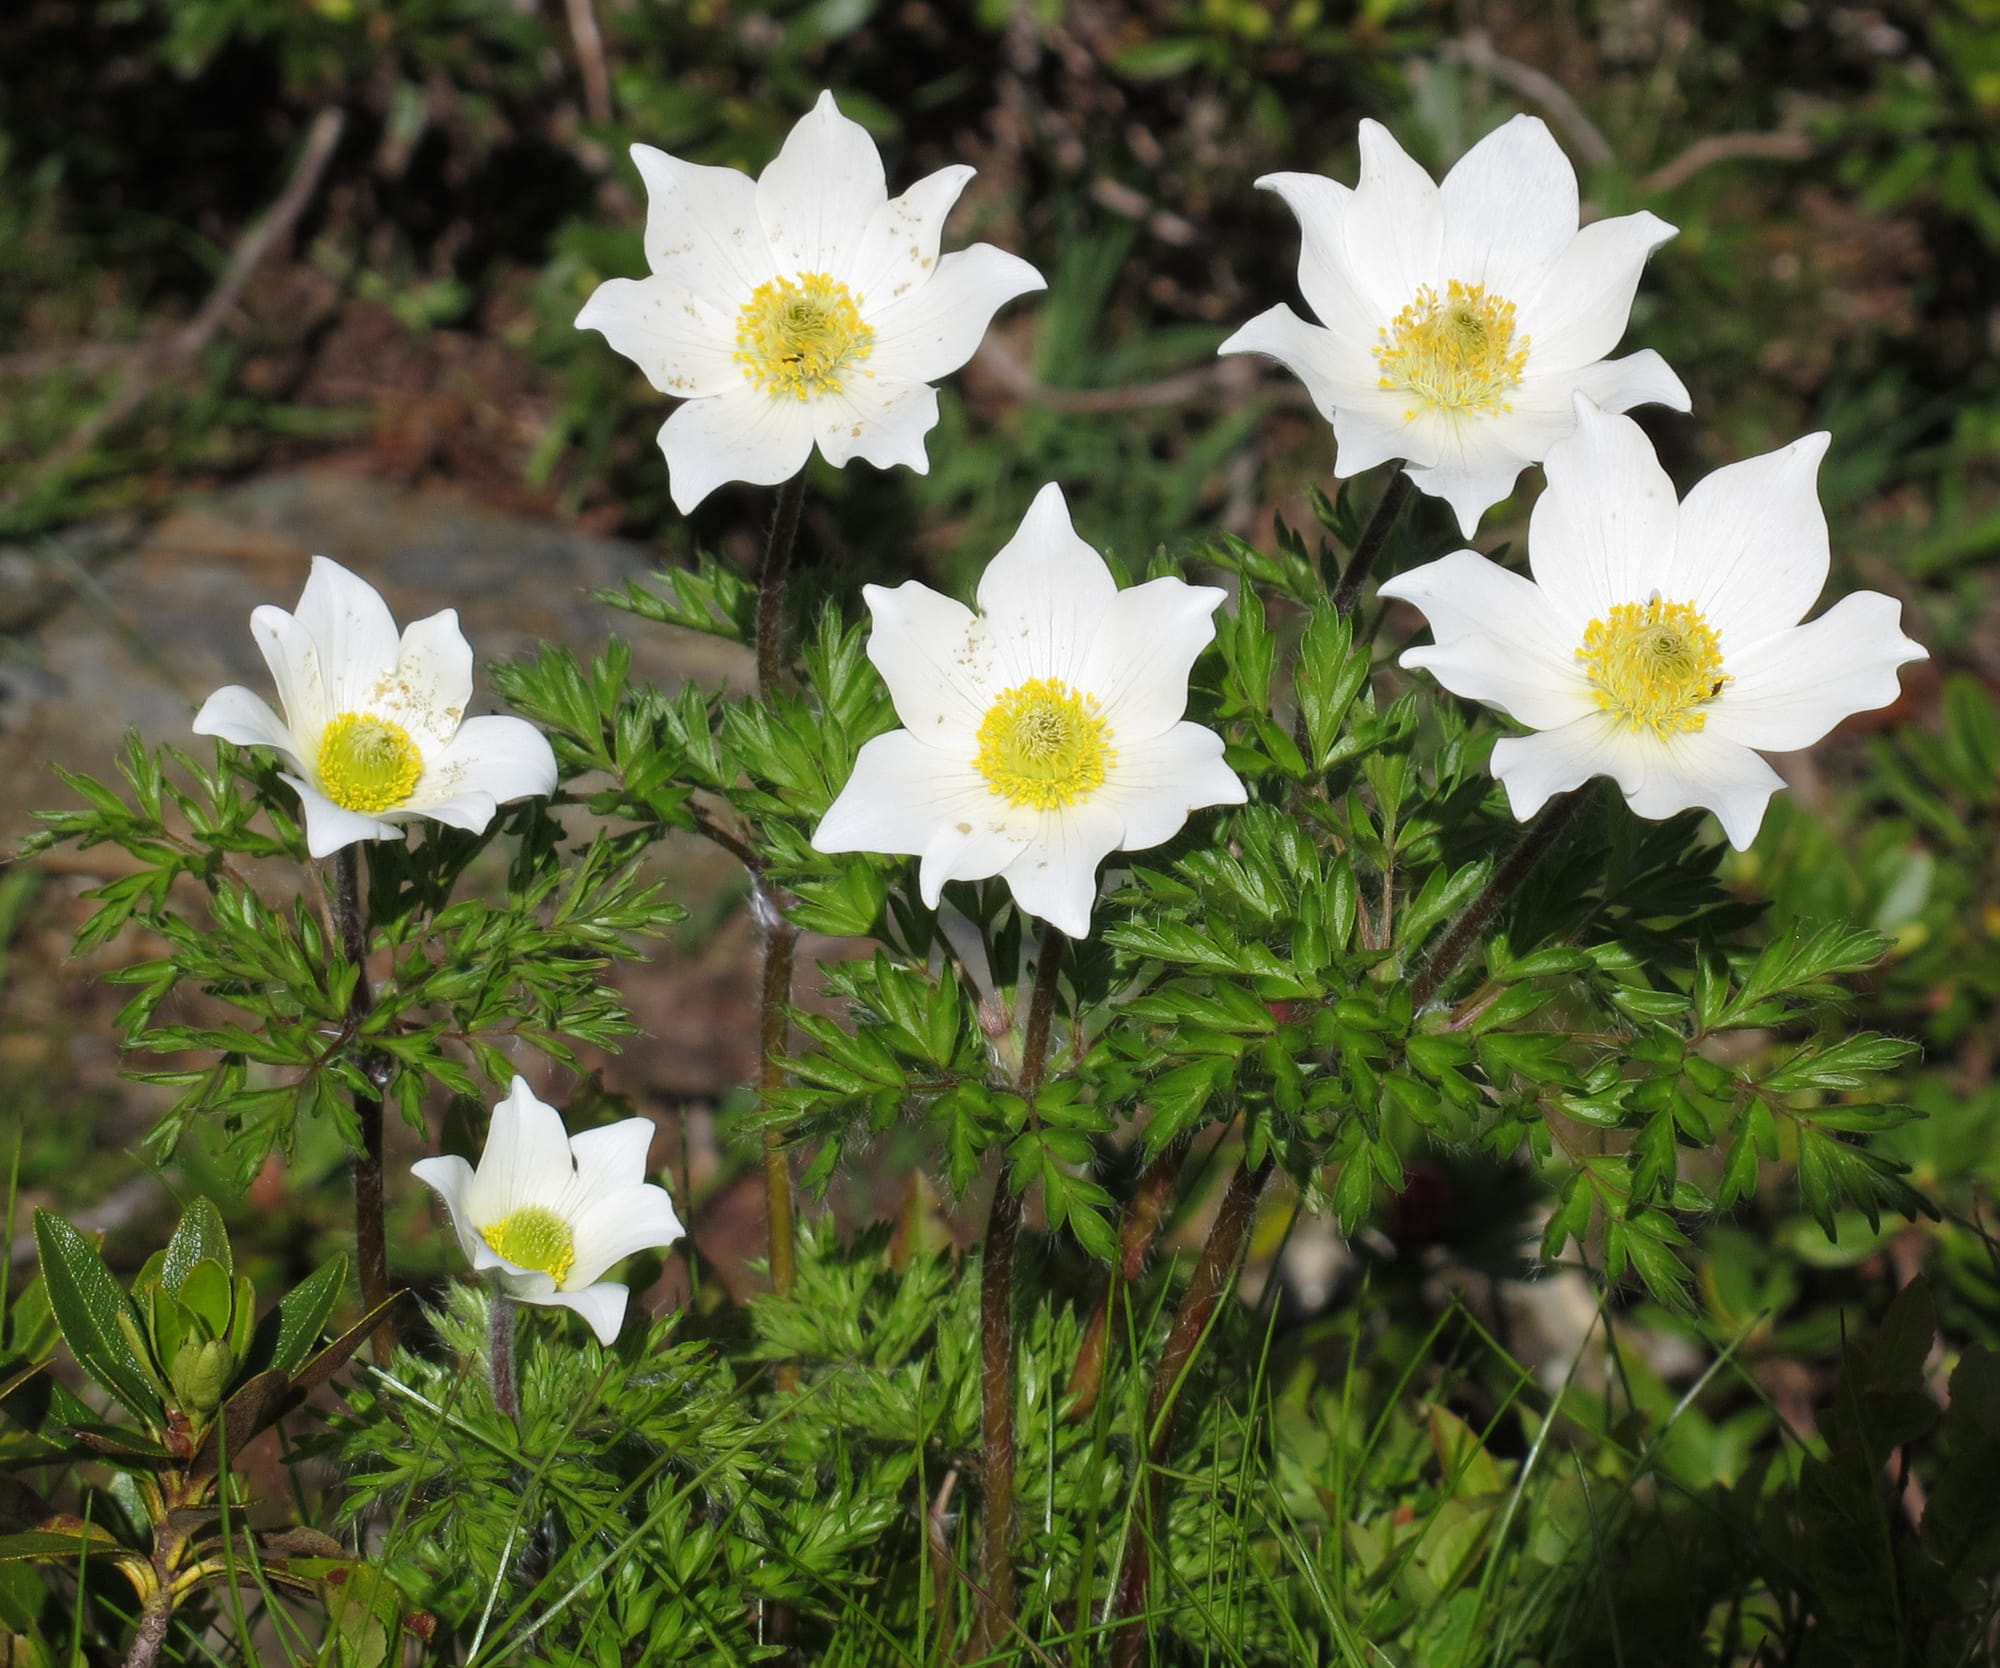 Alpine pasqueflowers, a group of six flowers with seven or eight white petals with a yellow center.